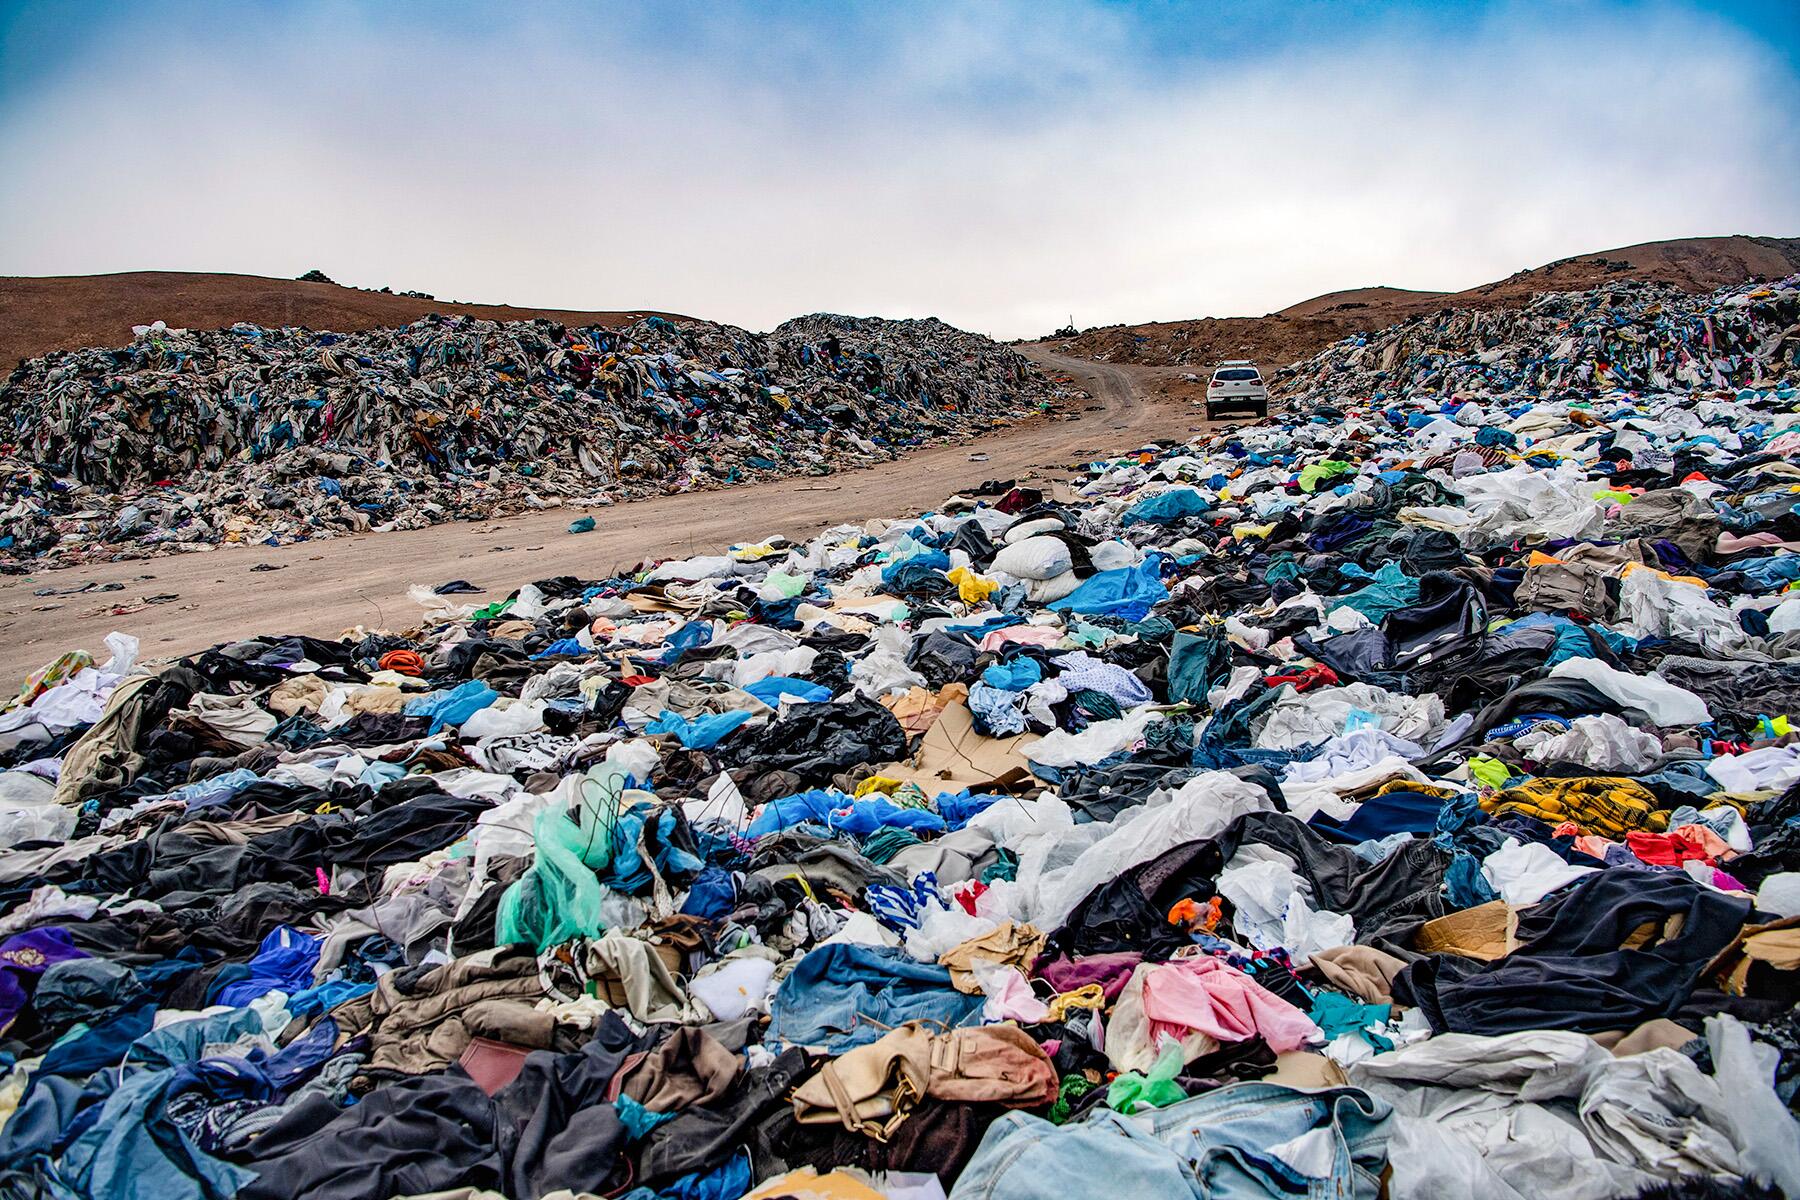 The Atacama Desert Is Being Used as a Dumping Ground for Fast Fashion